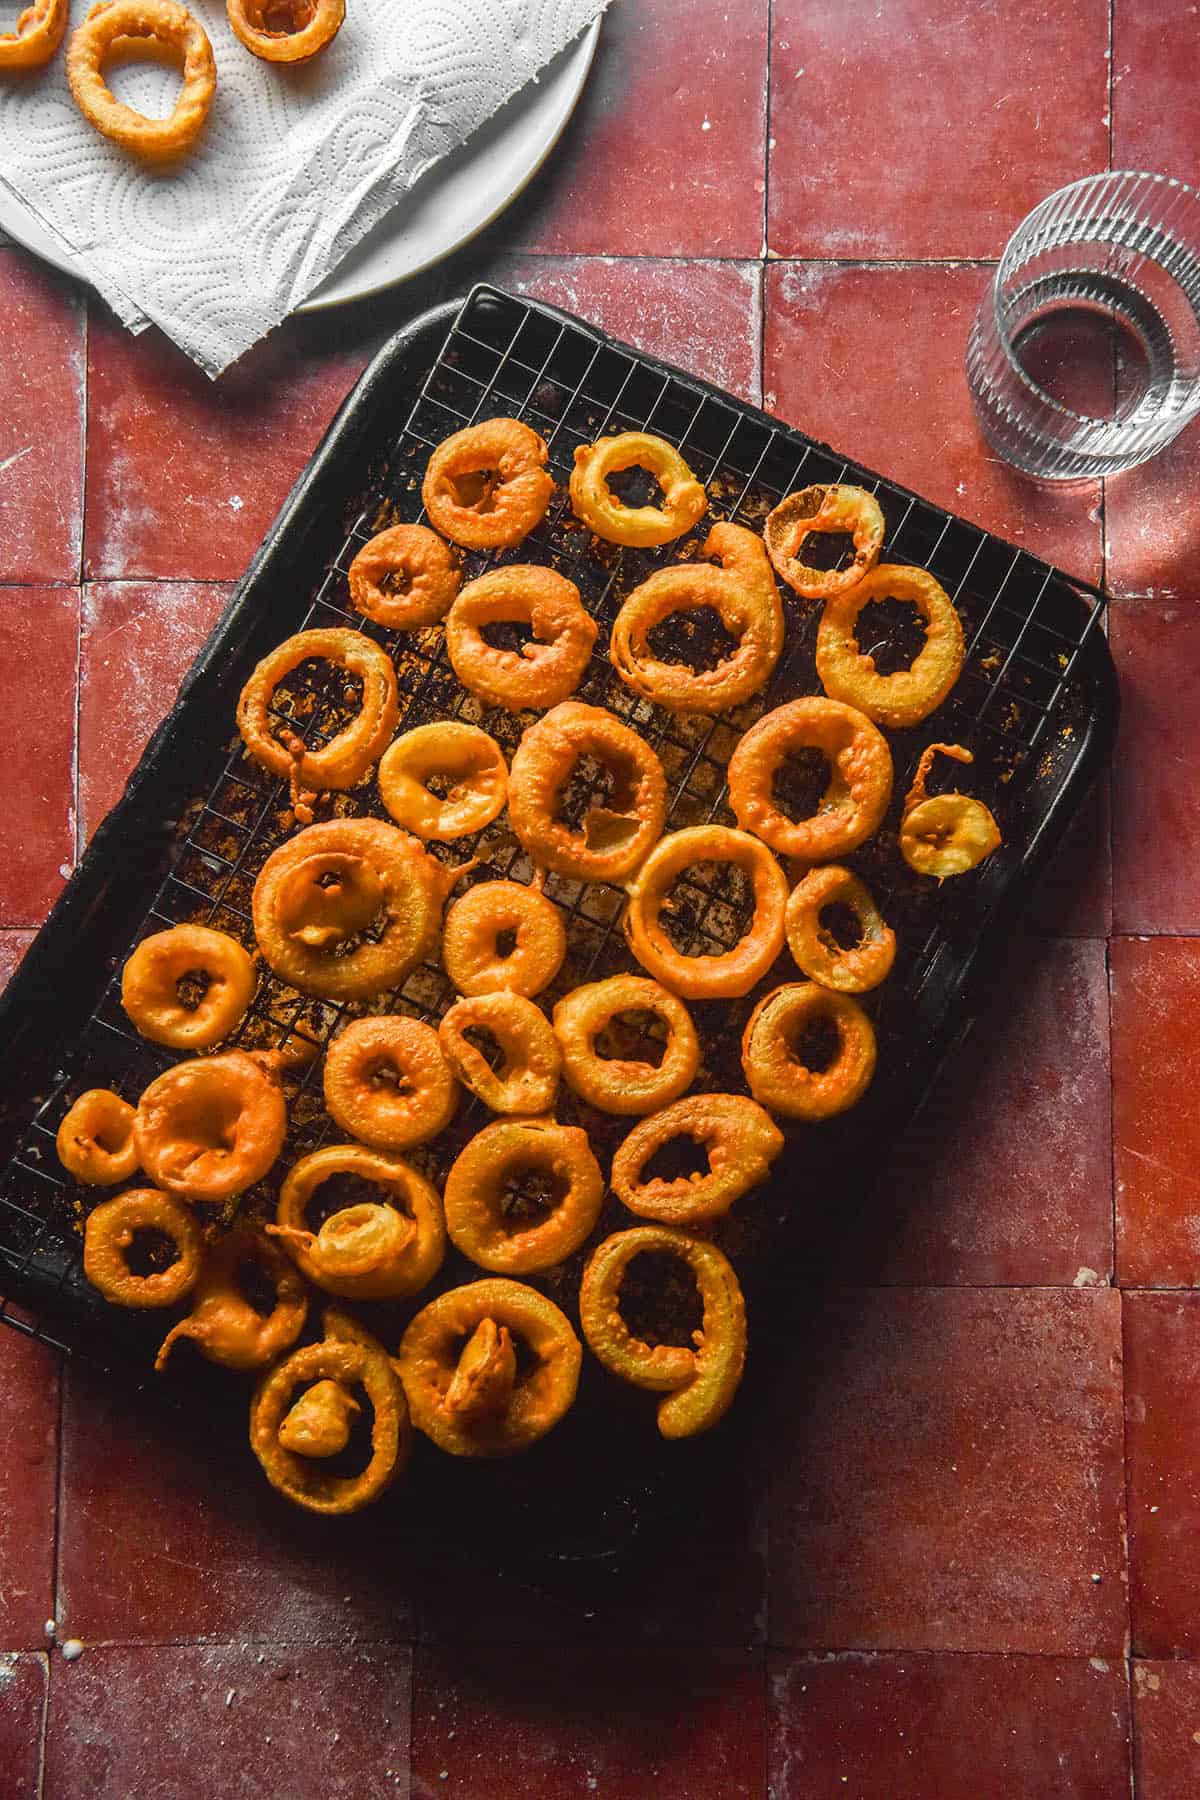 An aerial image of low FODMAP onion rings on a cooling track atop a baking tray. The baking tray sits on a terracotta tile backdrop